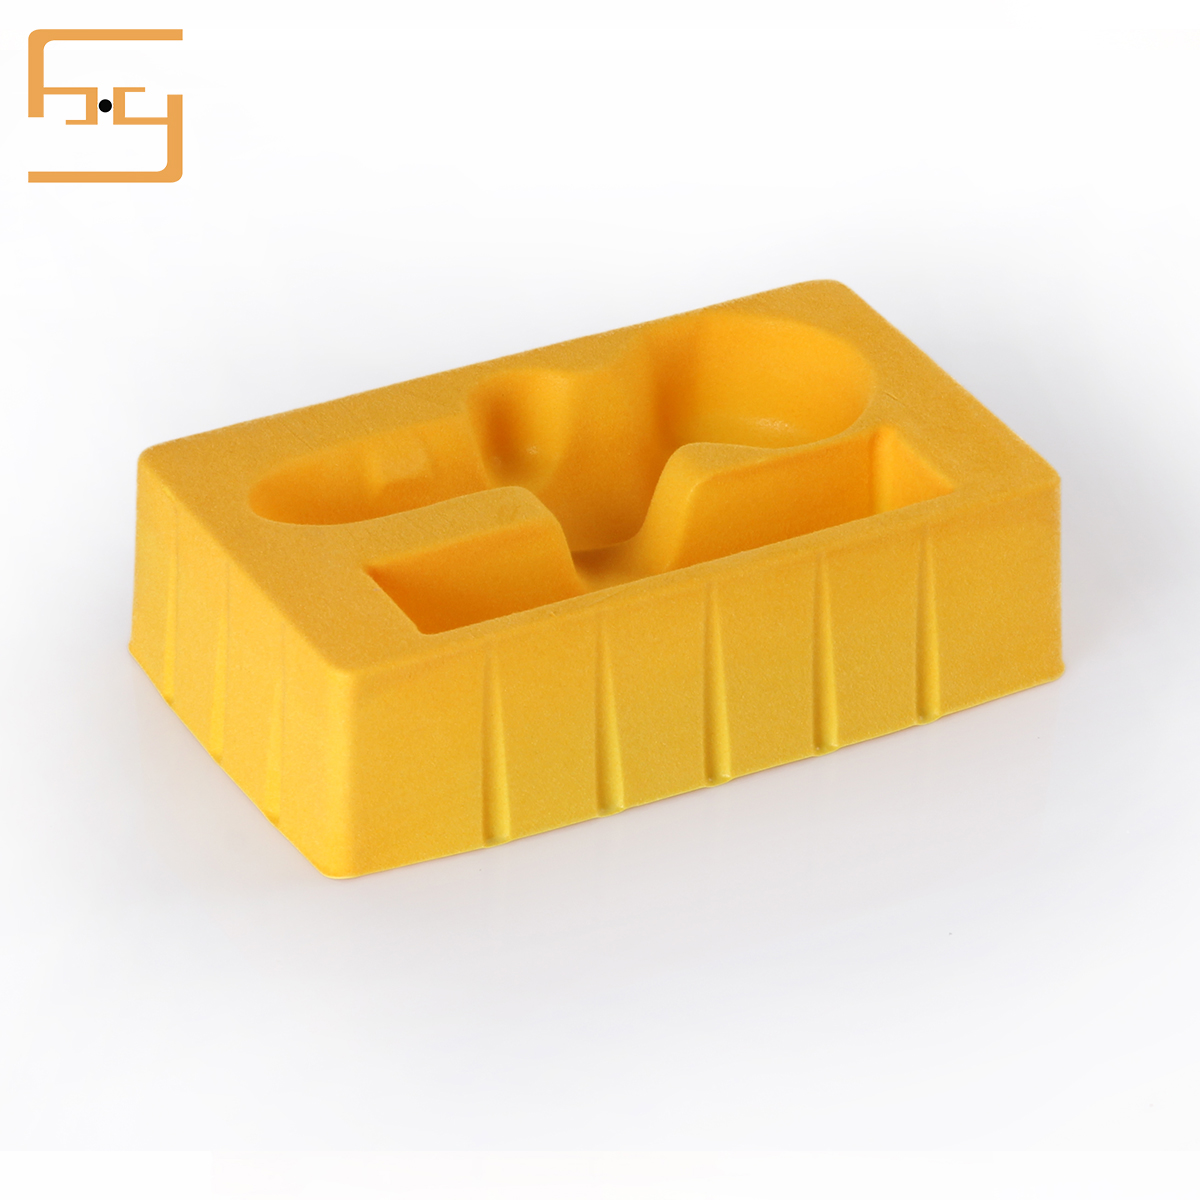 Shenzhen 2018 New PVC PS Flocked Red Tool Set Blister Packing Tray Box